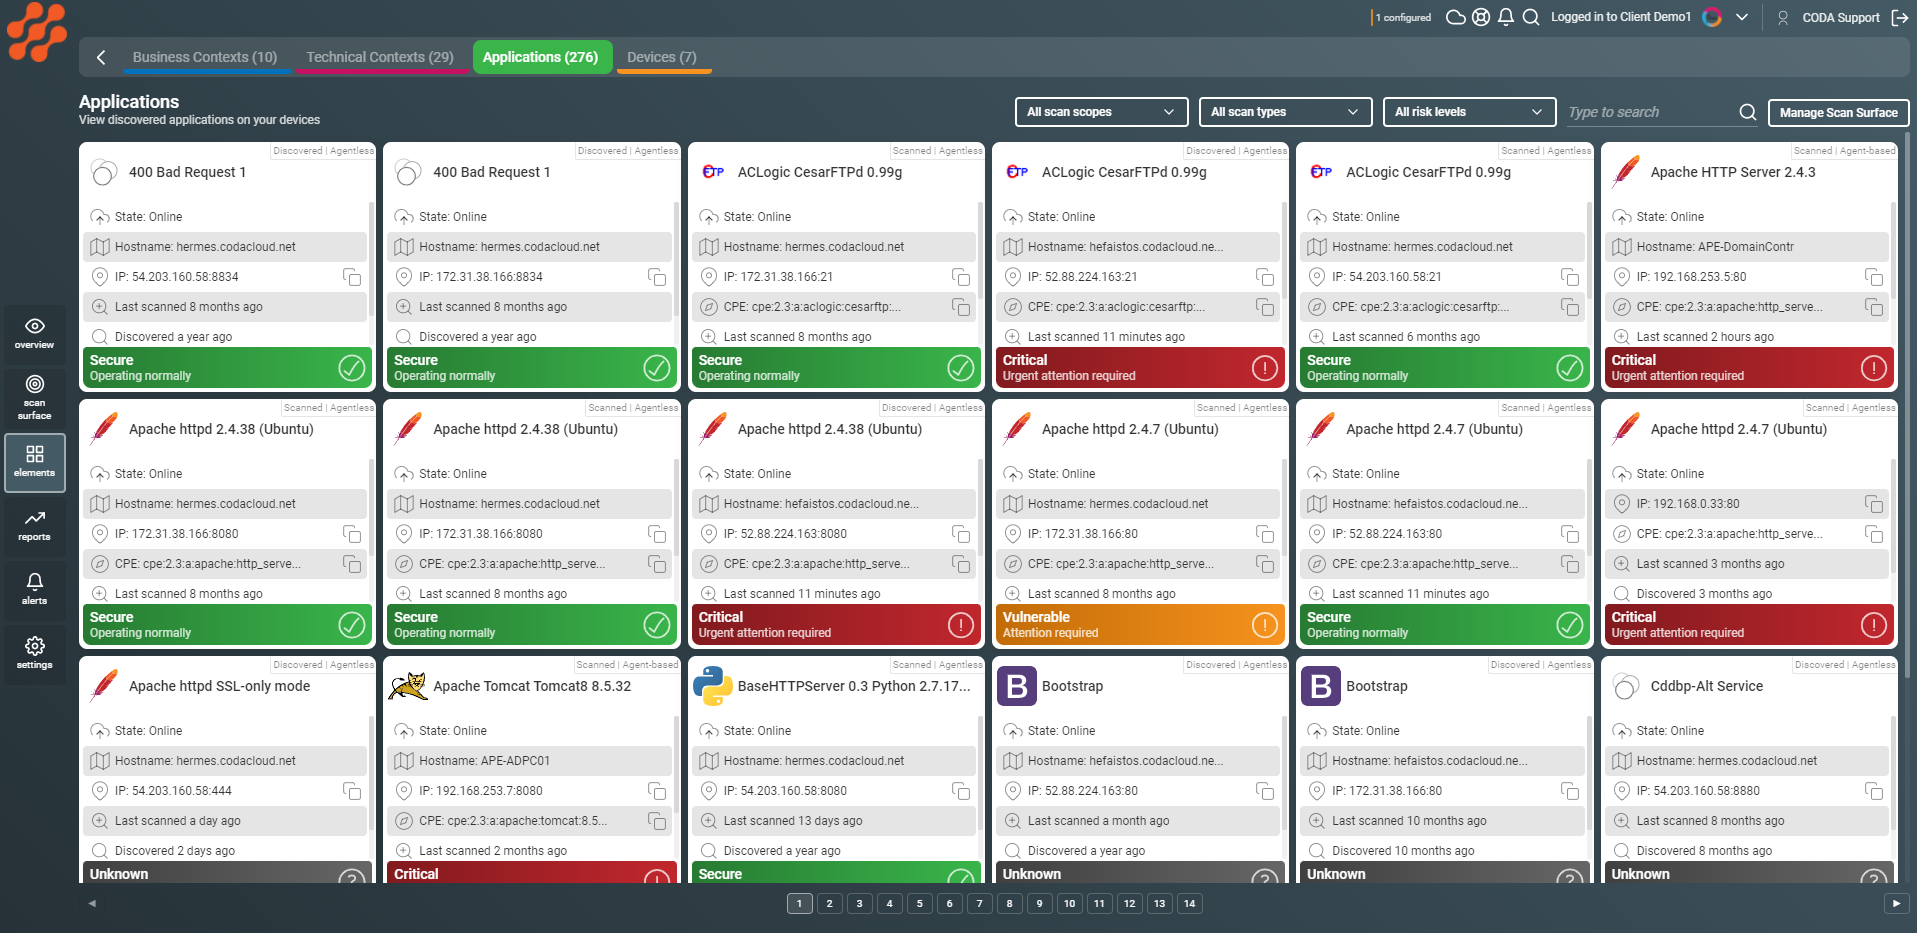 Discover and assess active vulnerabilities on all applications running on your endpoints